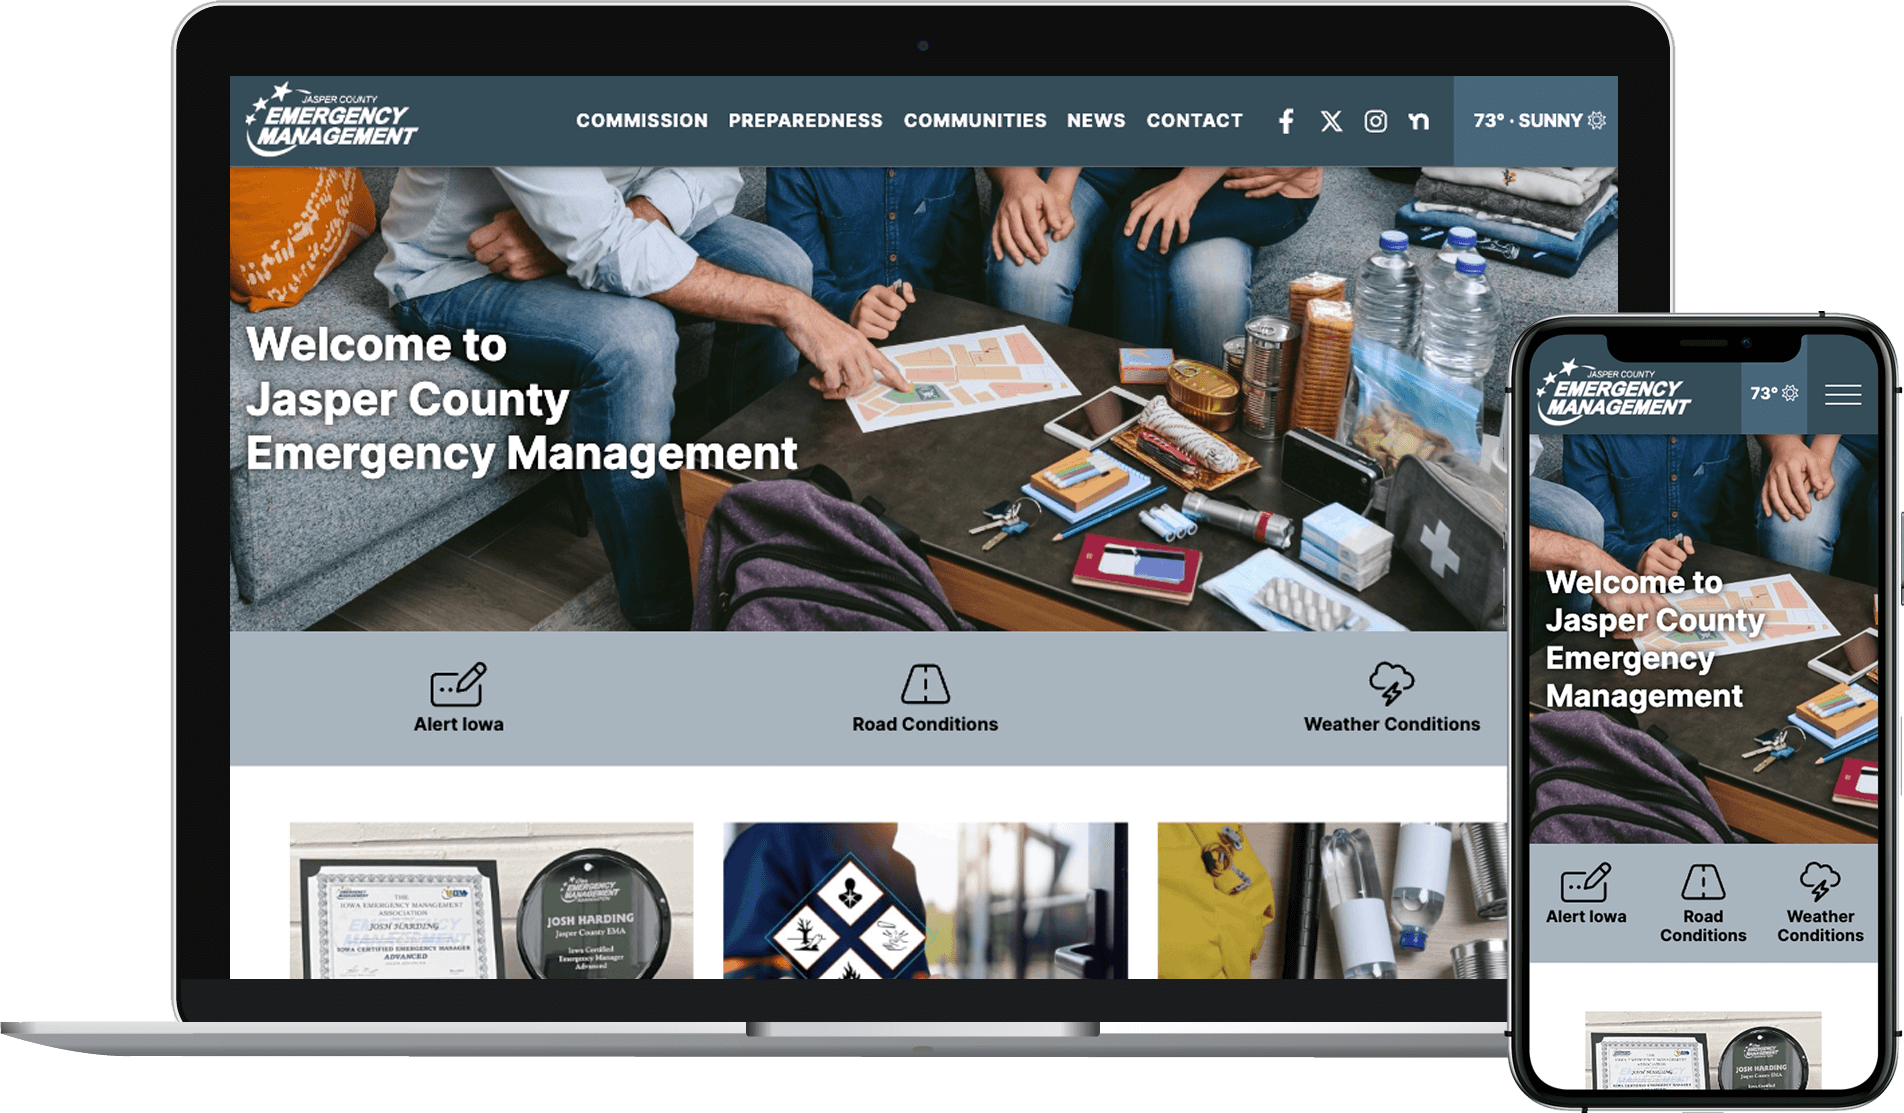 Jasper County Emergency Management website homepage displayed on a laptop and phone.